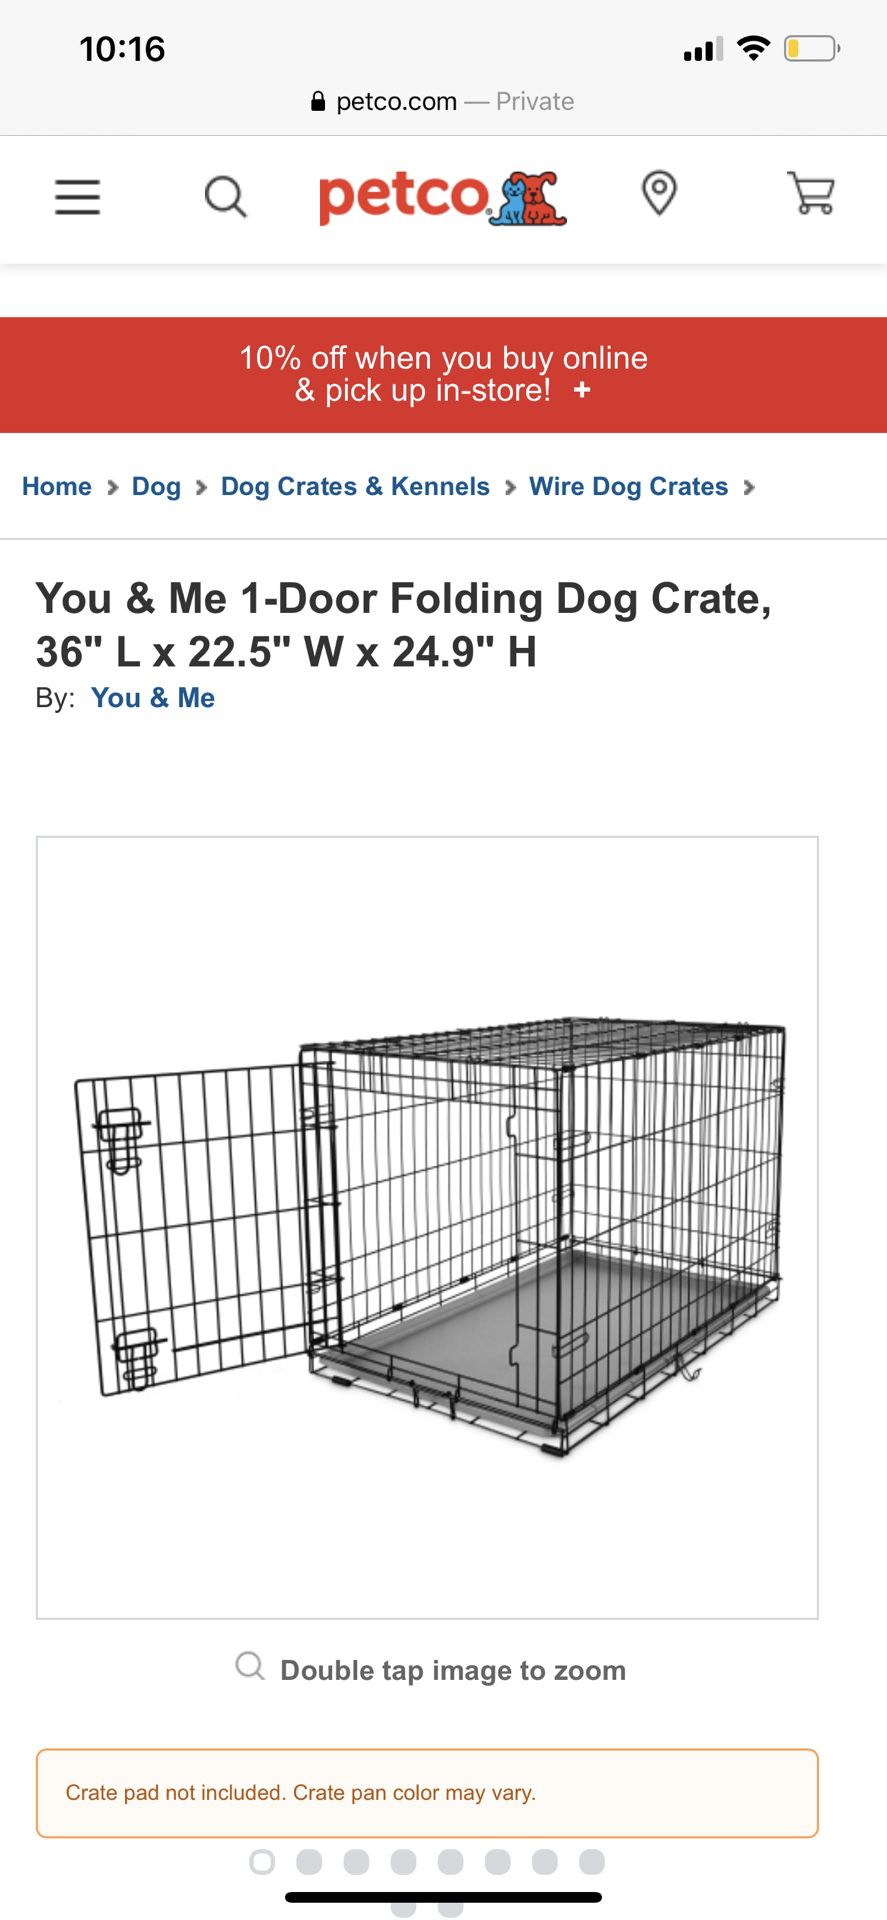 Large crate